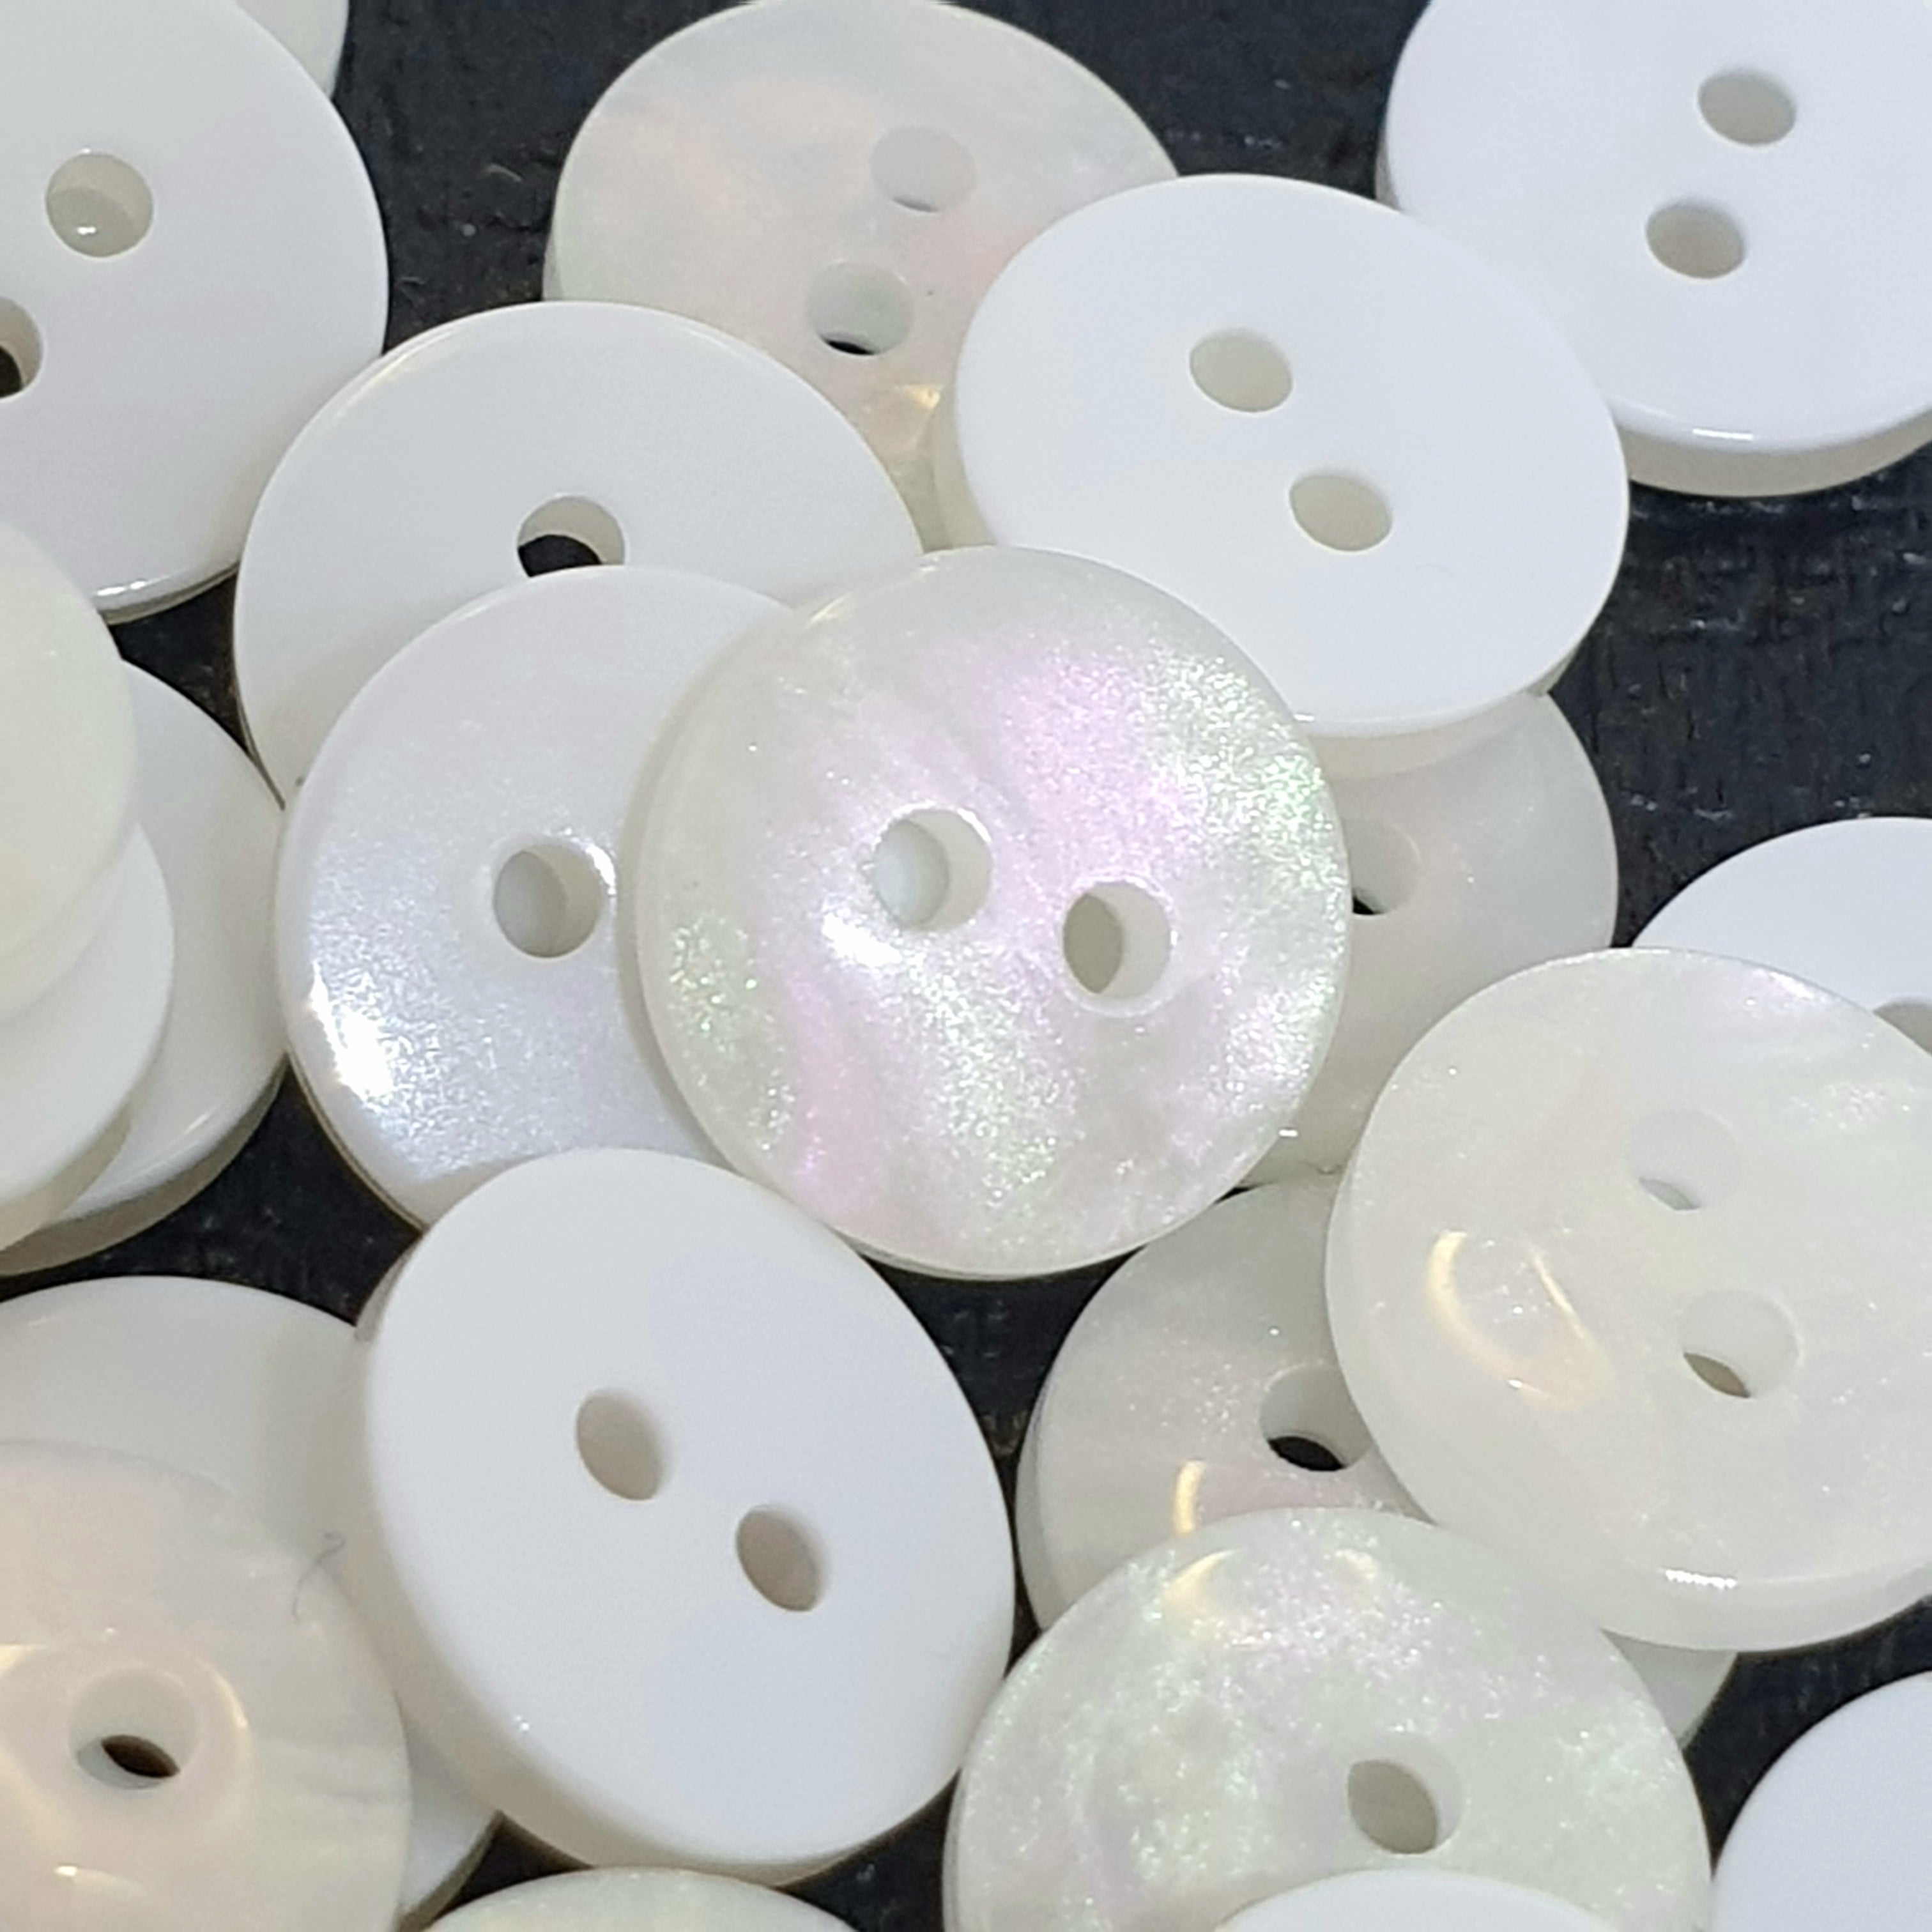 MajorCrafts 40pcs 15mm Cream White Pearlescent Galaxy Effect 2 Holes Small Round Resin Sewing Buttons